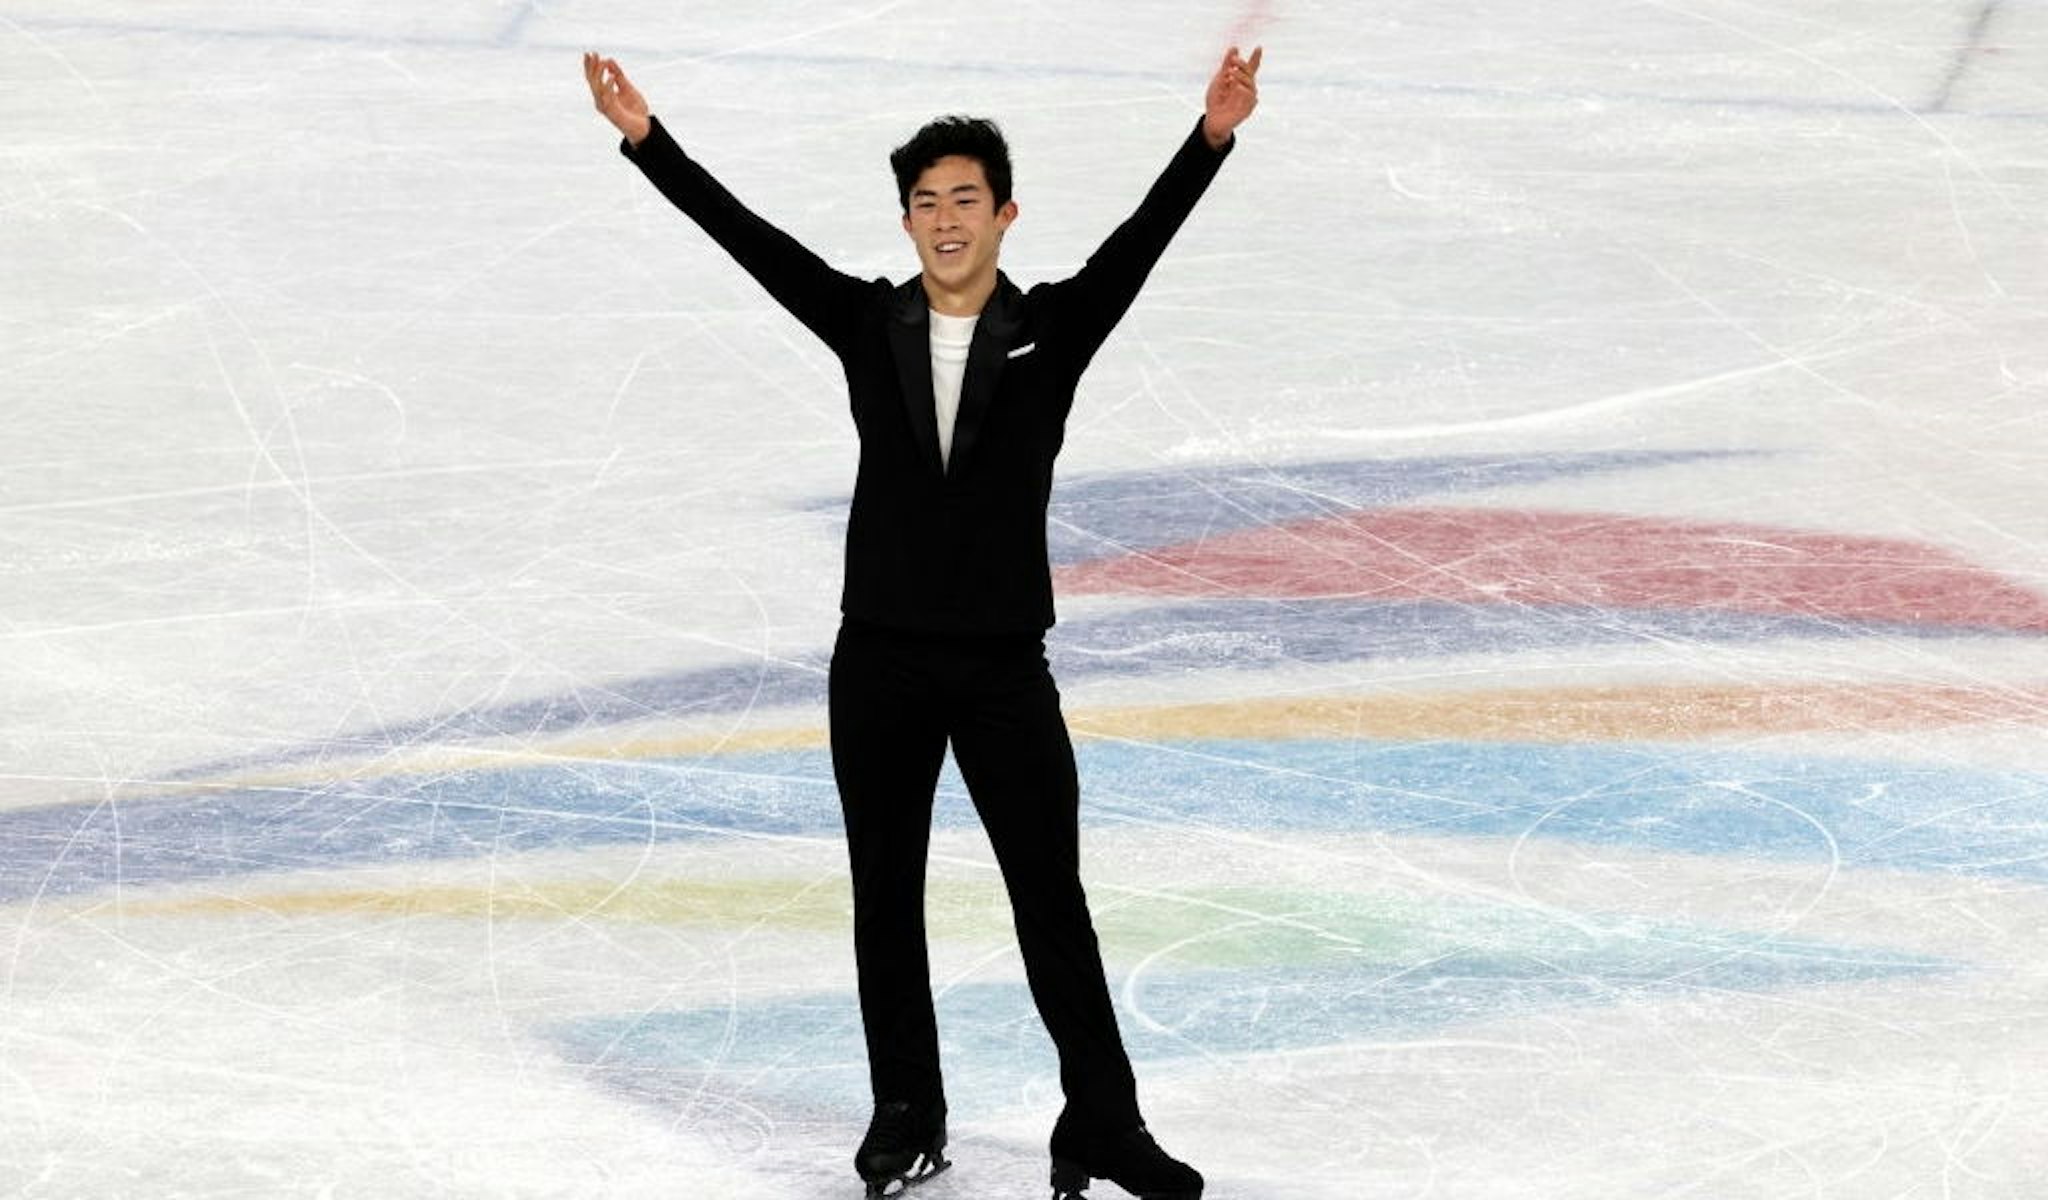 BEIJING, CHINA - FEBRUARY 08: Nathan Chen of Team United States reacts during the Men's Single Skating Short Program on day four of the Beijing 2022 Winter Olympic Games at Capital Indoor Stadium on February 08, 2022 in Beijing, China. (Photo by Xavier Laine/Getty Images)